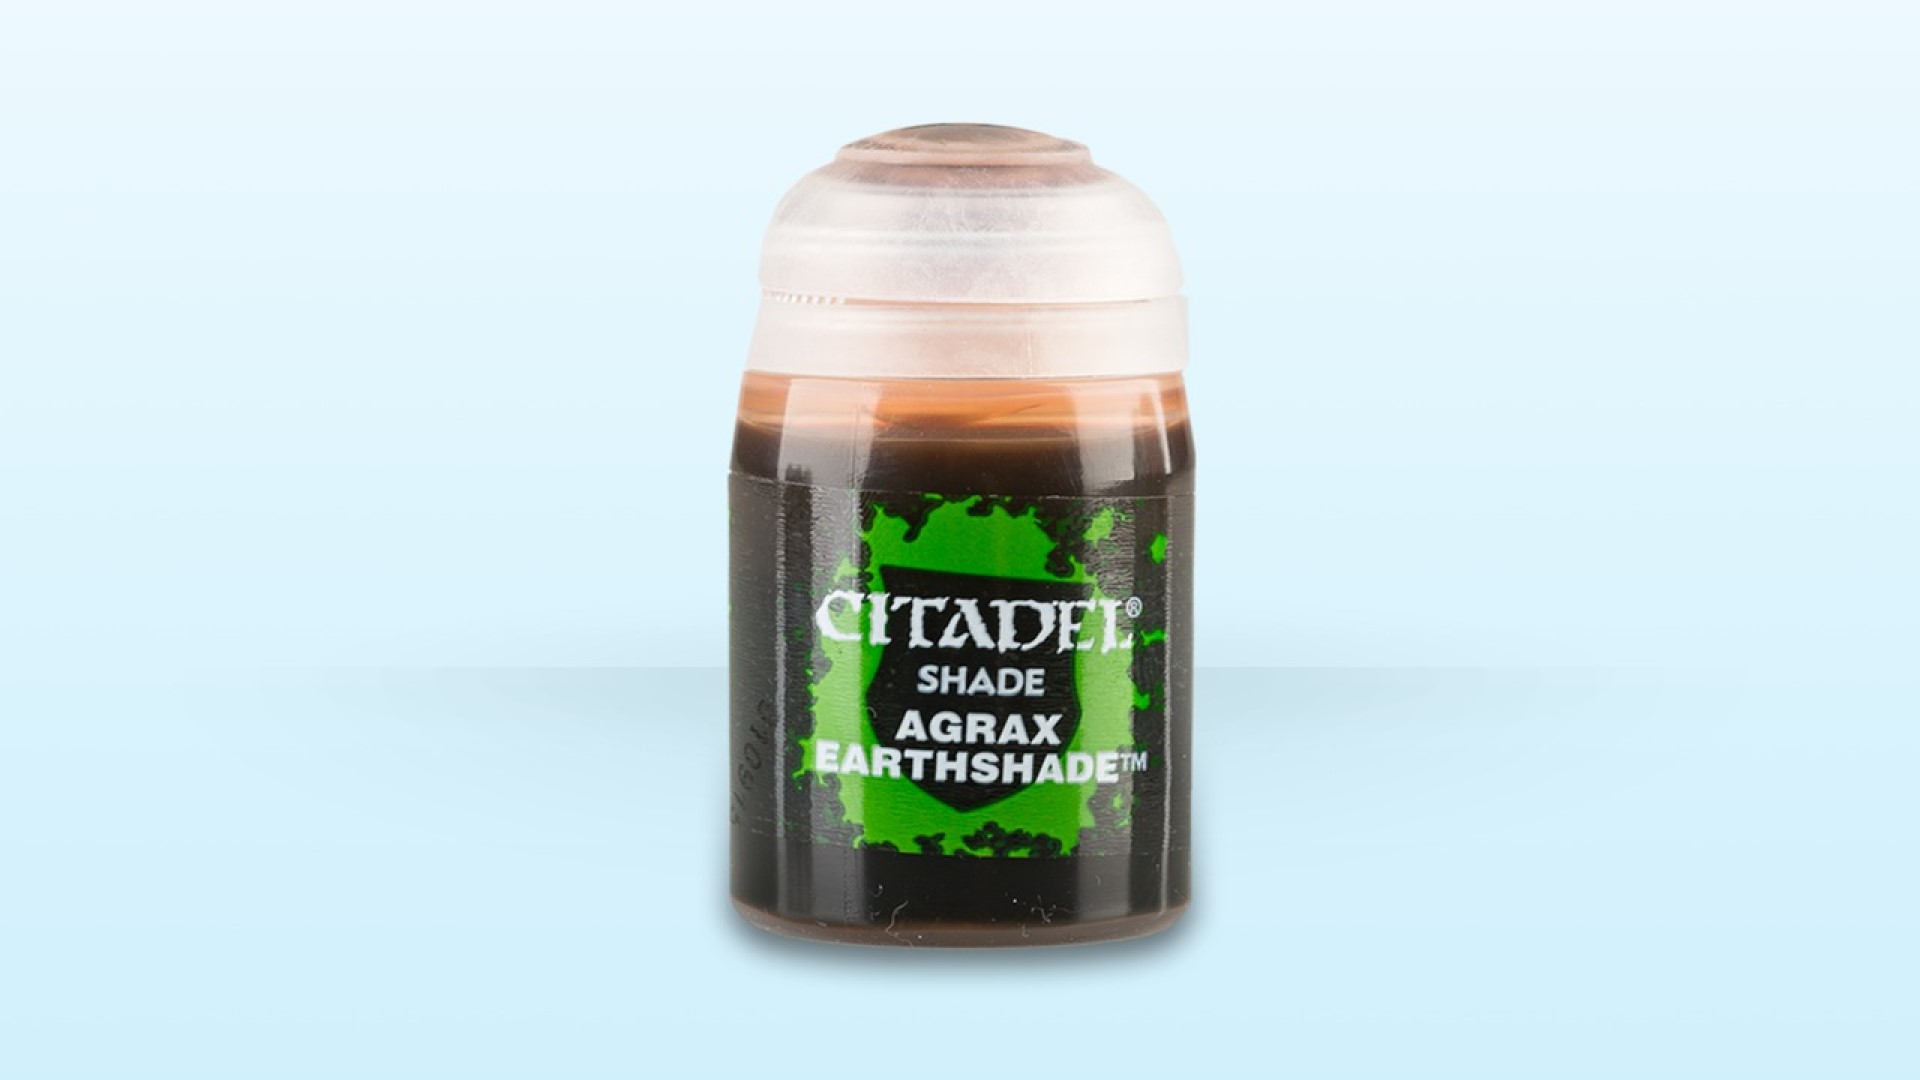 Best paints for miniatures - Sales photo of a bottle of Citadel Agrax Earthshade paint